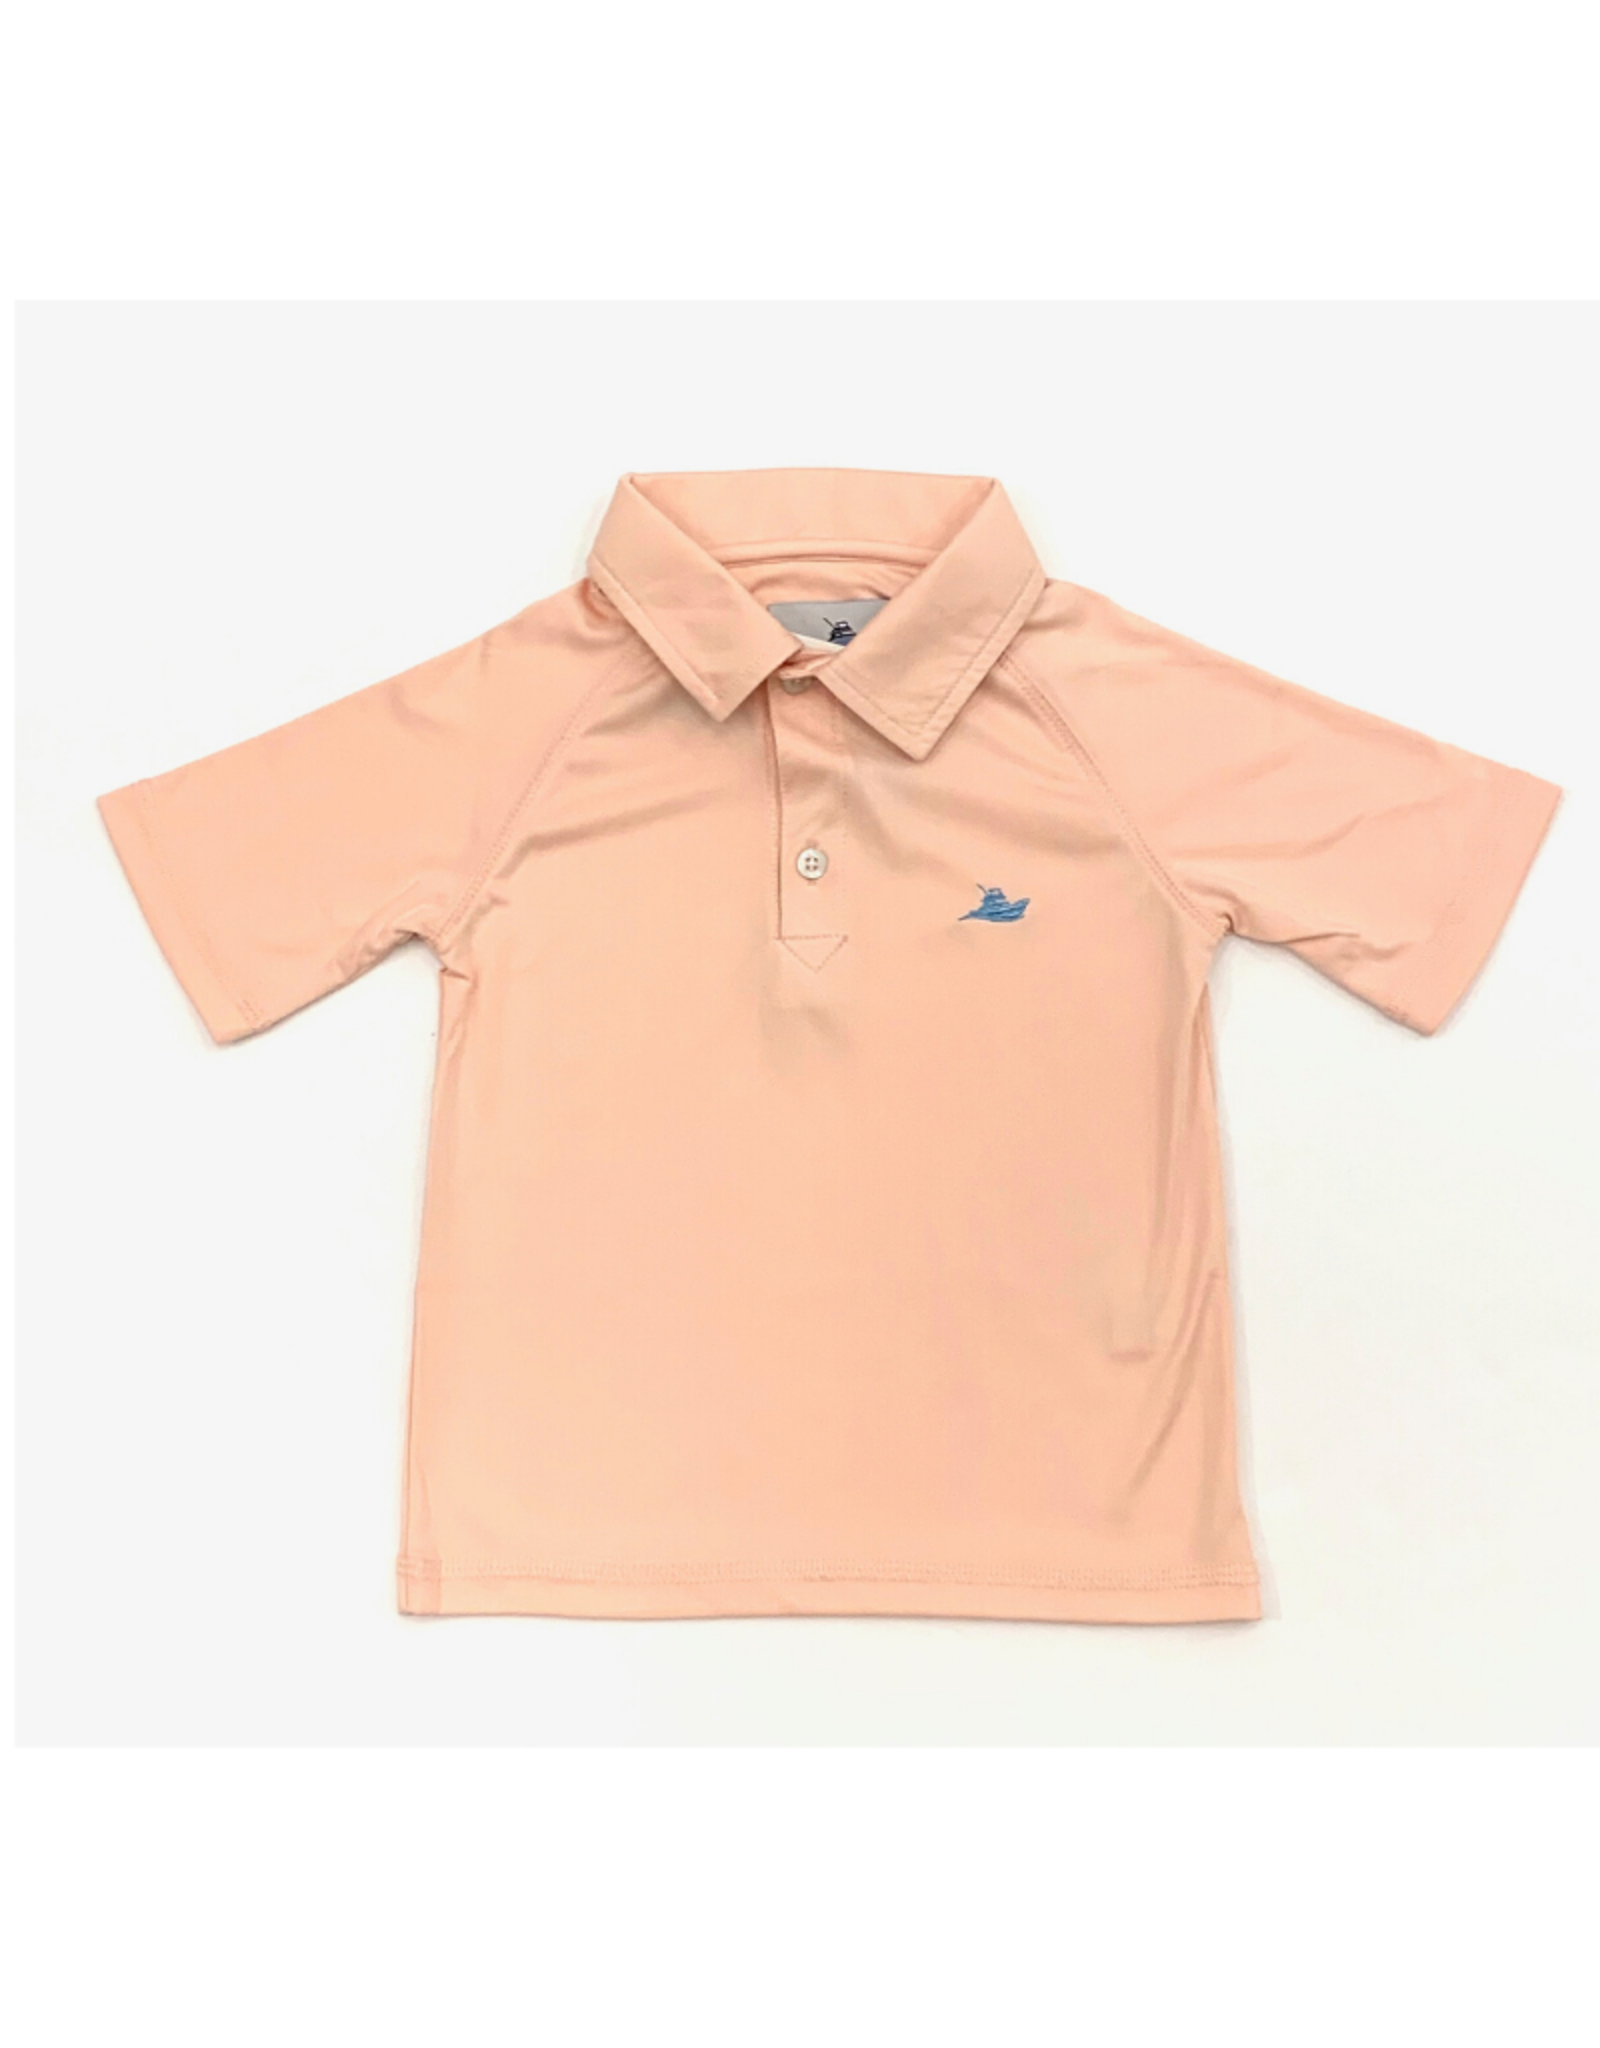 SouthBound Pink Dryfit Polo